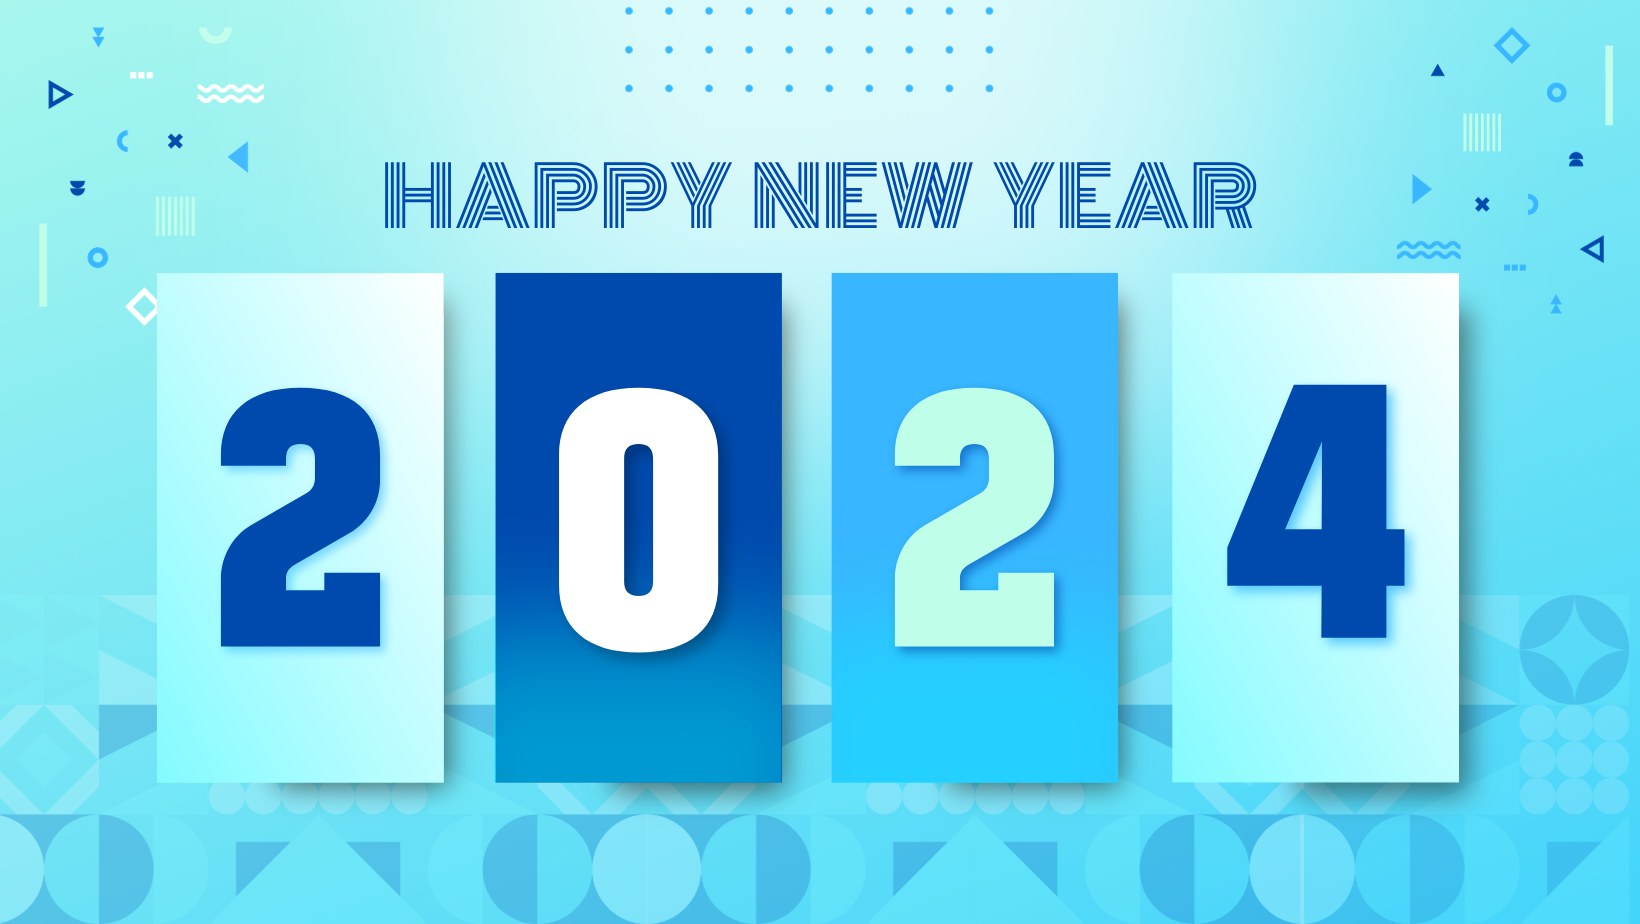 Download Happy New Year Facebook Covers 2024 Helo National